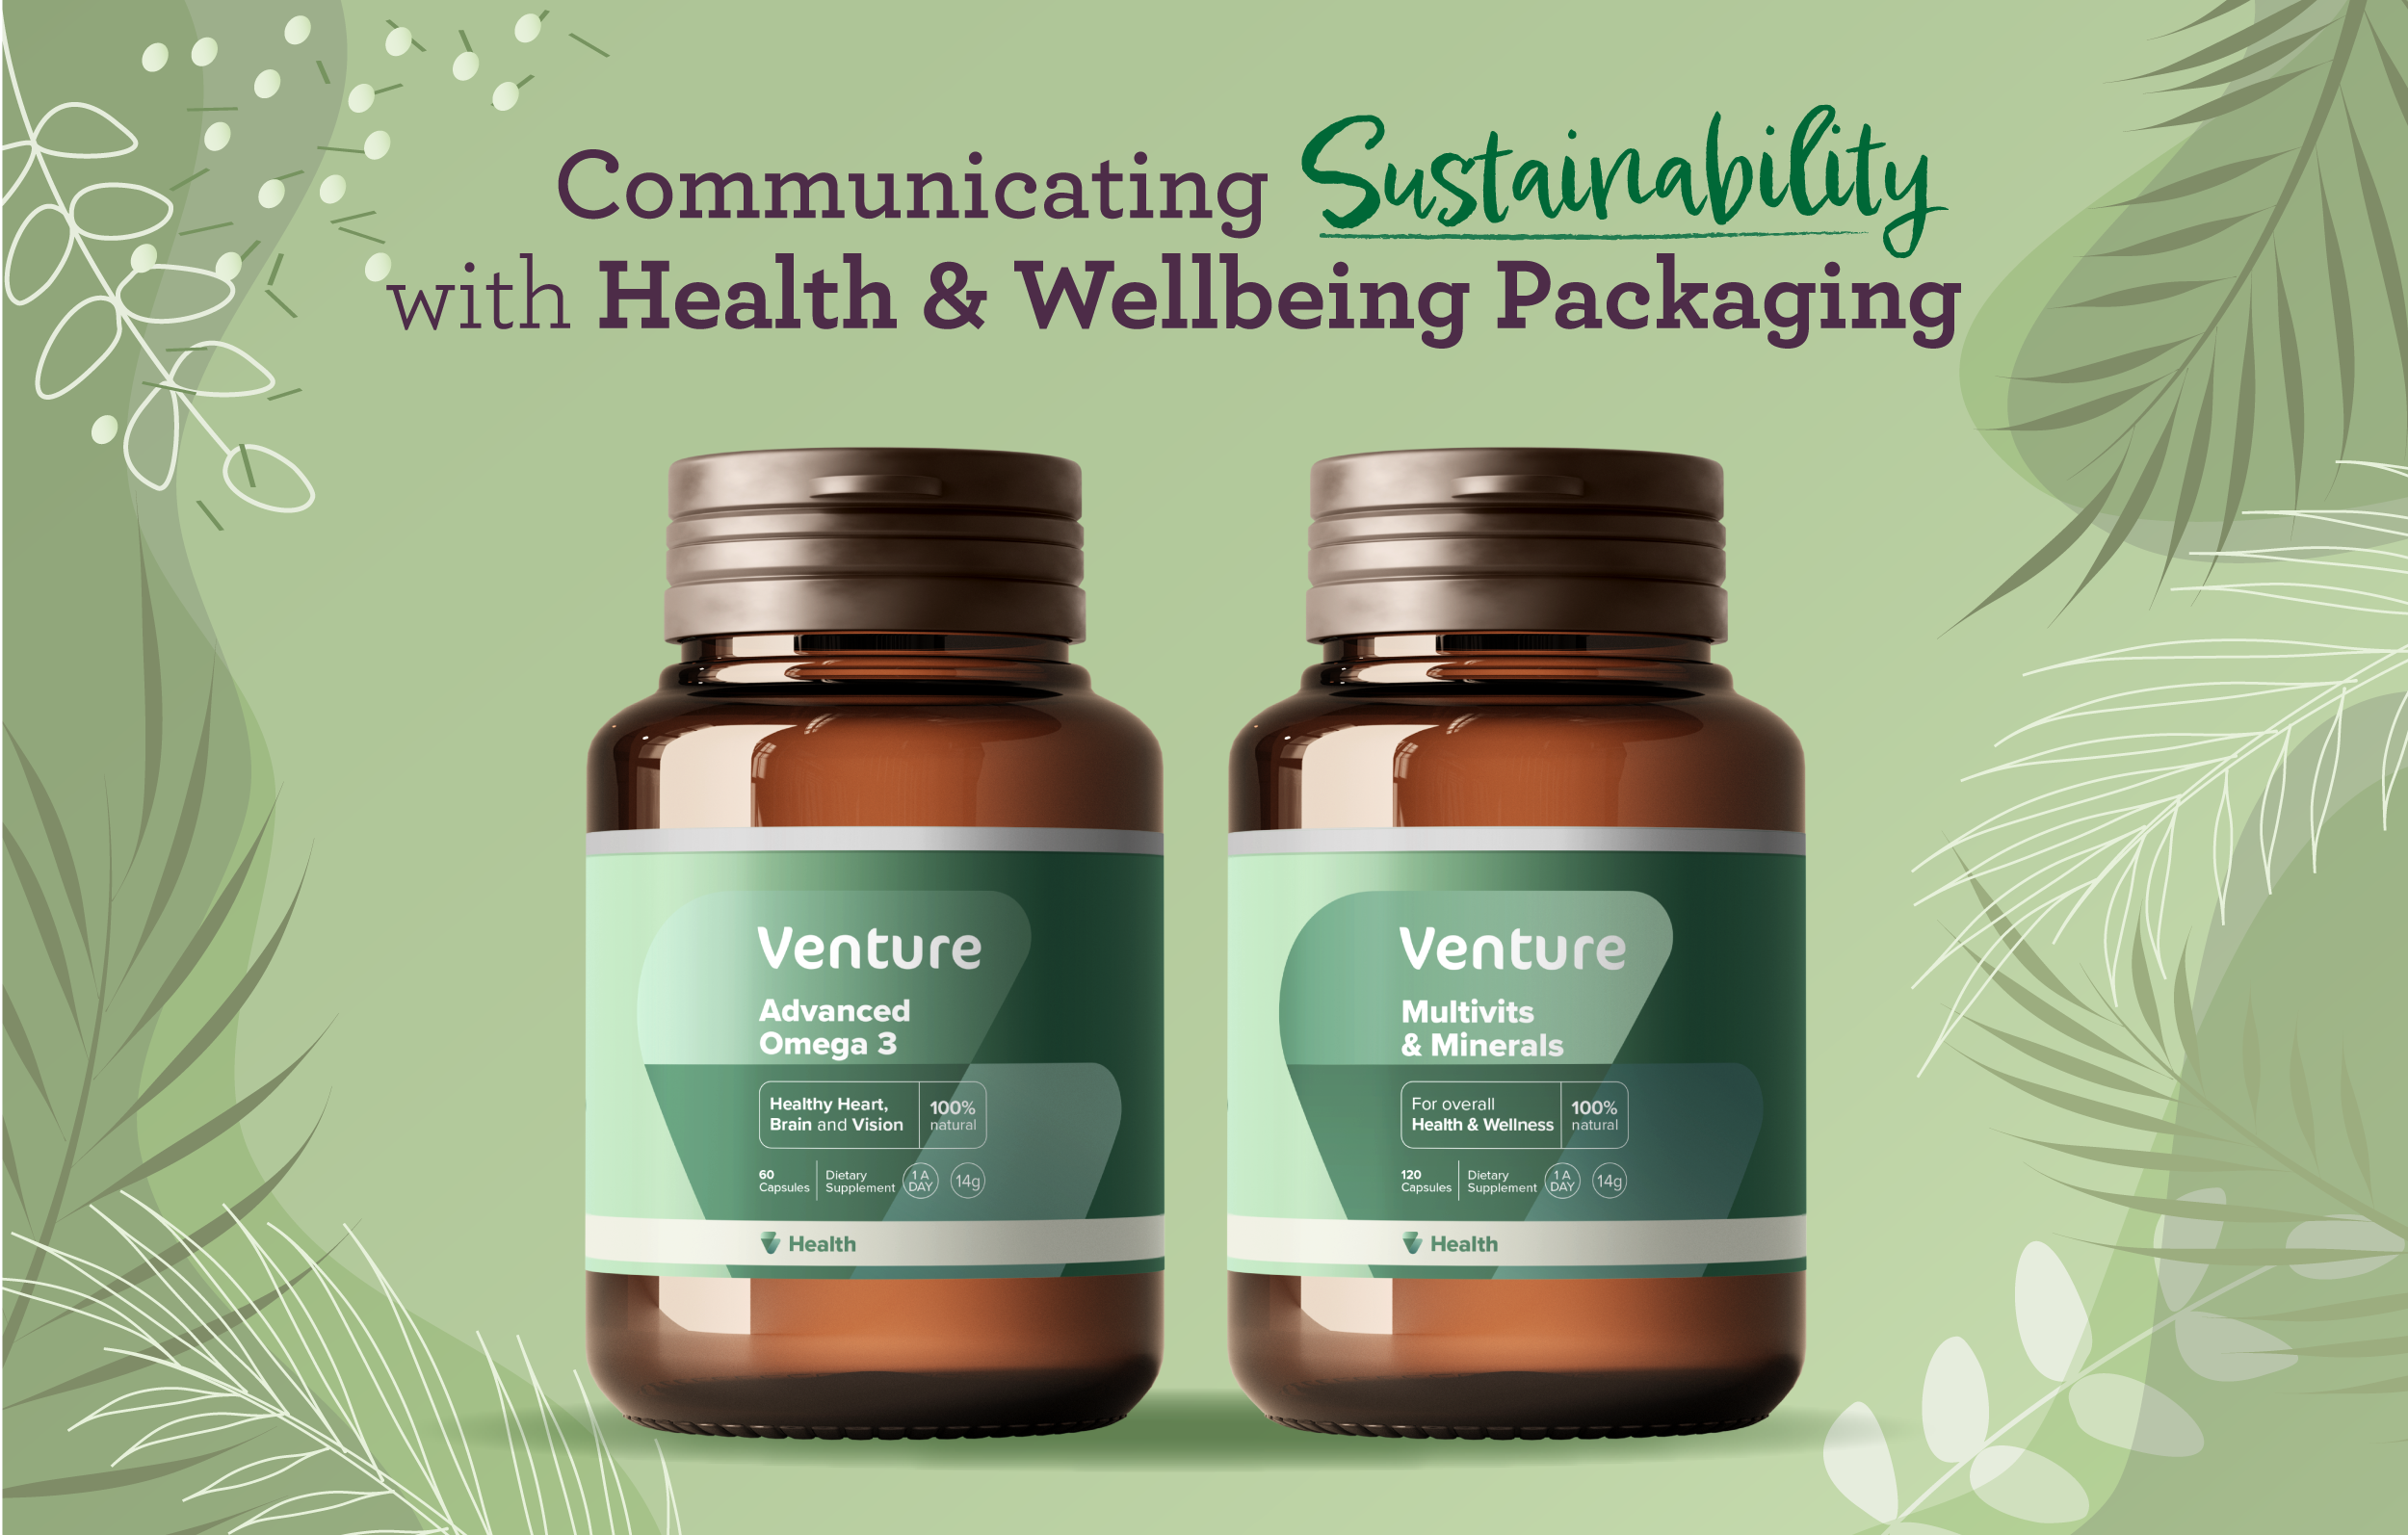 Sustainability Health & Wellbeing Packaging